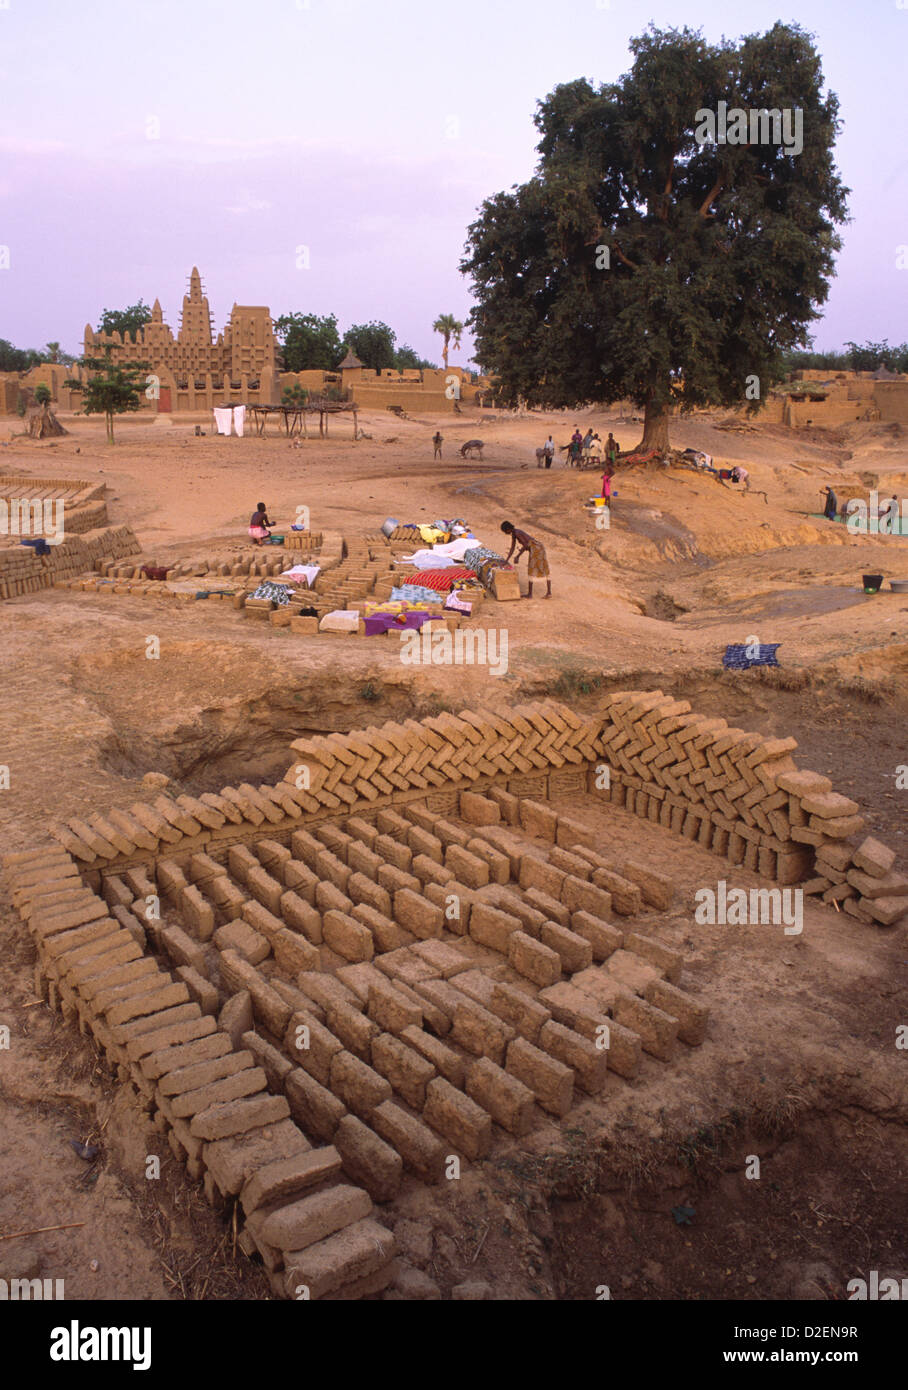 The village of Birga Dogon on the Dogon Plain in Mali, West Africa. Showing mud bricks drying in the sun used for construction. Stock Photo